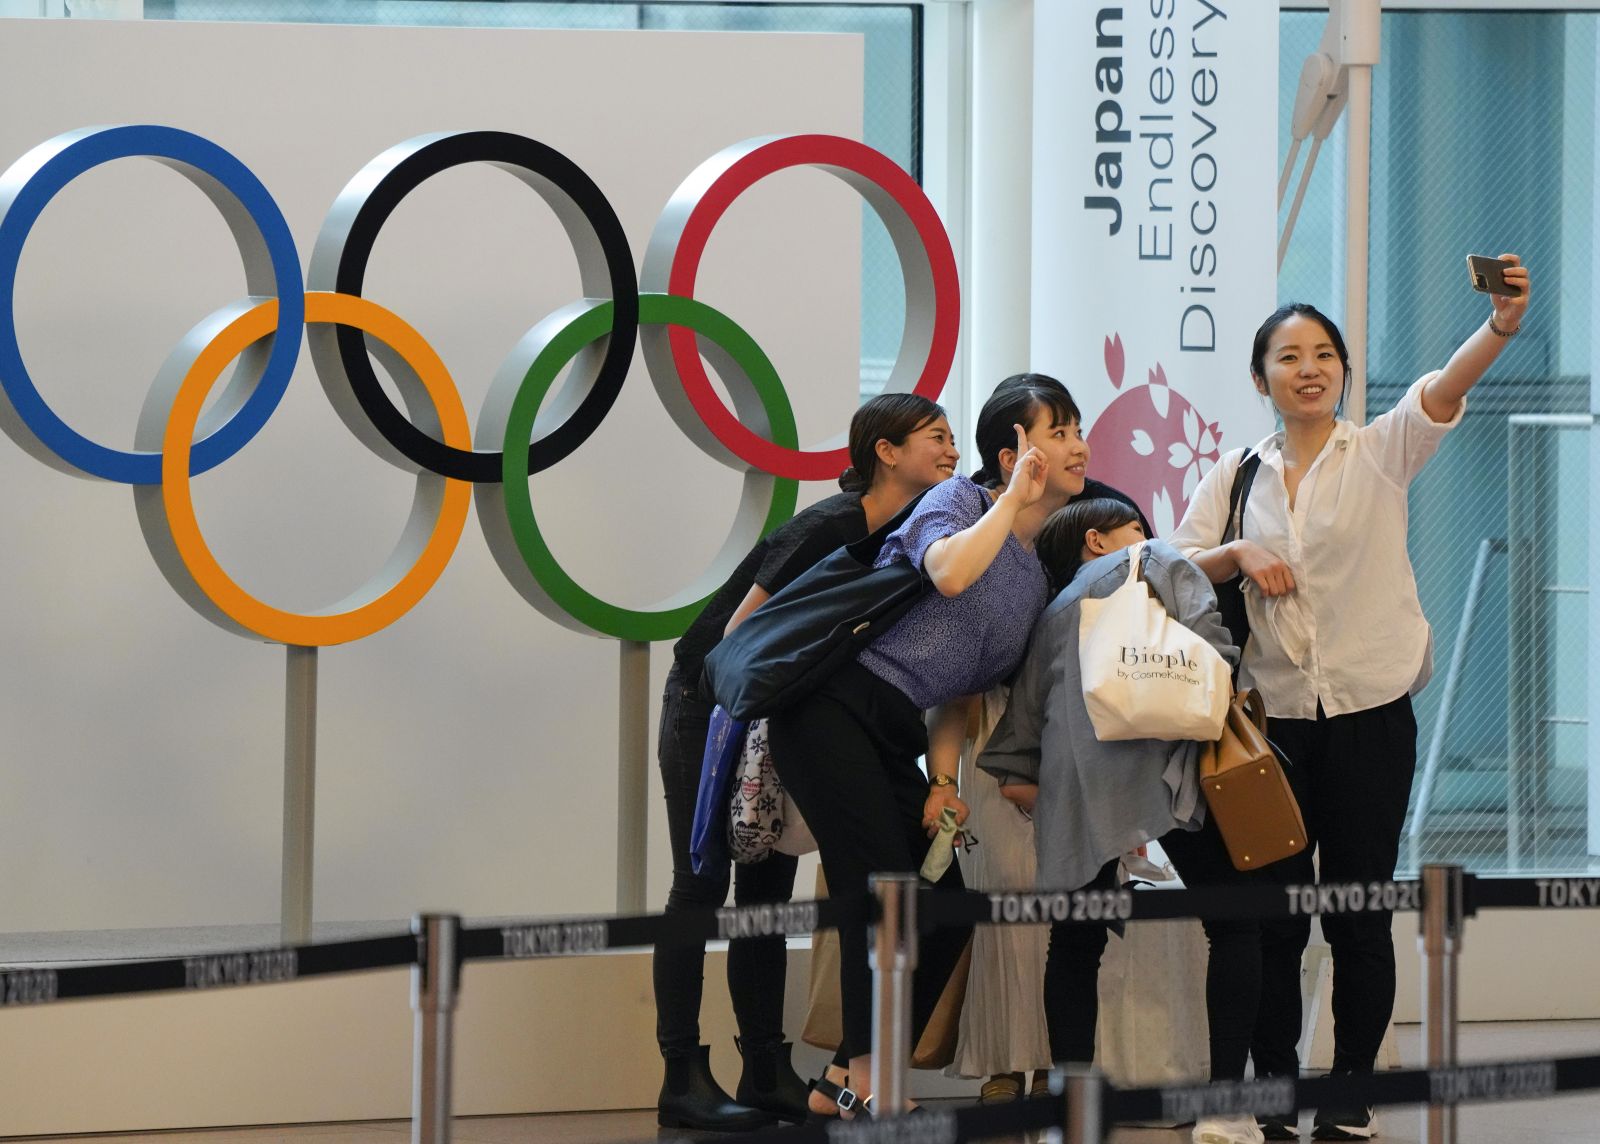 epa09330749 Visitors take a selfie with the Olympic Rings monument set at an arrival terminal of Tokyo International Airport at Haneda, Japan, 08 July 2021. Japanese government decided on 08 July 2021 to declare the fourth state of emergency for Tokyo, Japan, from 12 July 2021 through 22 August 2021 including the period of Tokyo 2020 Olympic Games. Japan prepare to declare a state of emergency for Tokyo and Okinawa. IOC and Tokyo 2020 Organising Committee will have a five-party talks to set formal decision on spectators for the Summer Games.  EPA/KIMIMASA MAYAMA